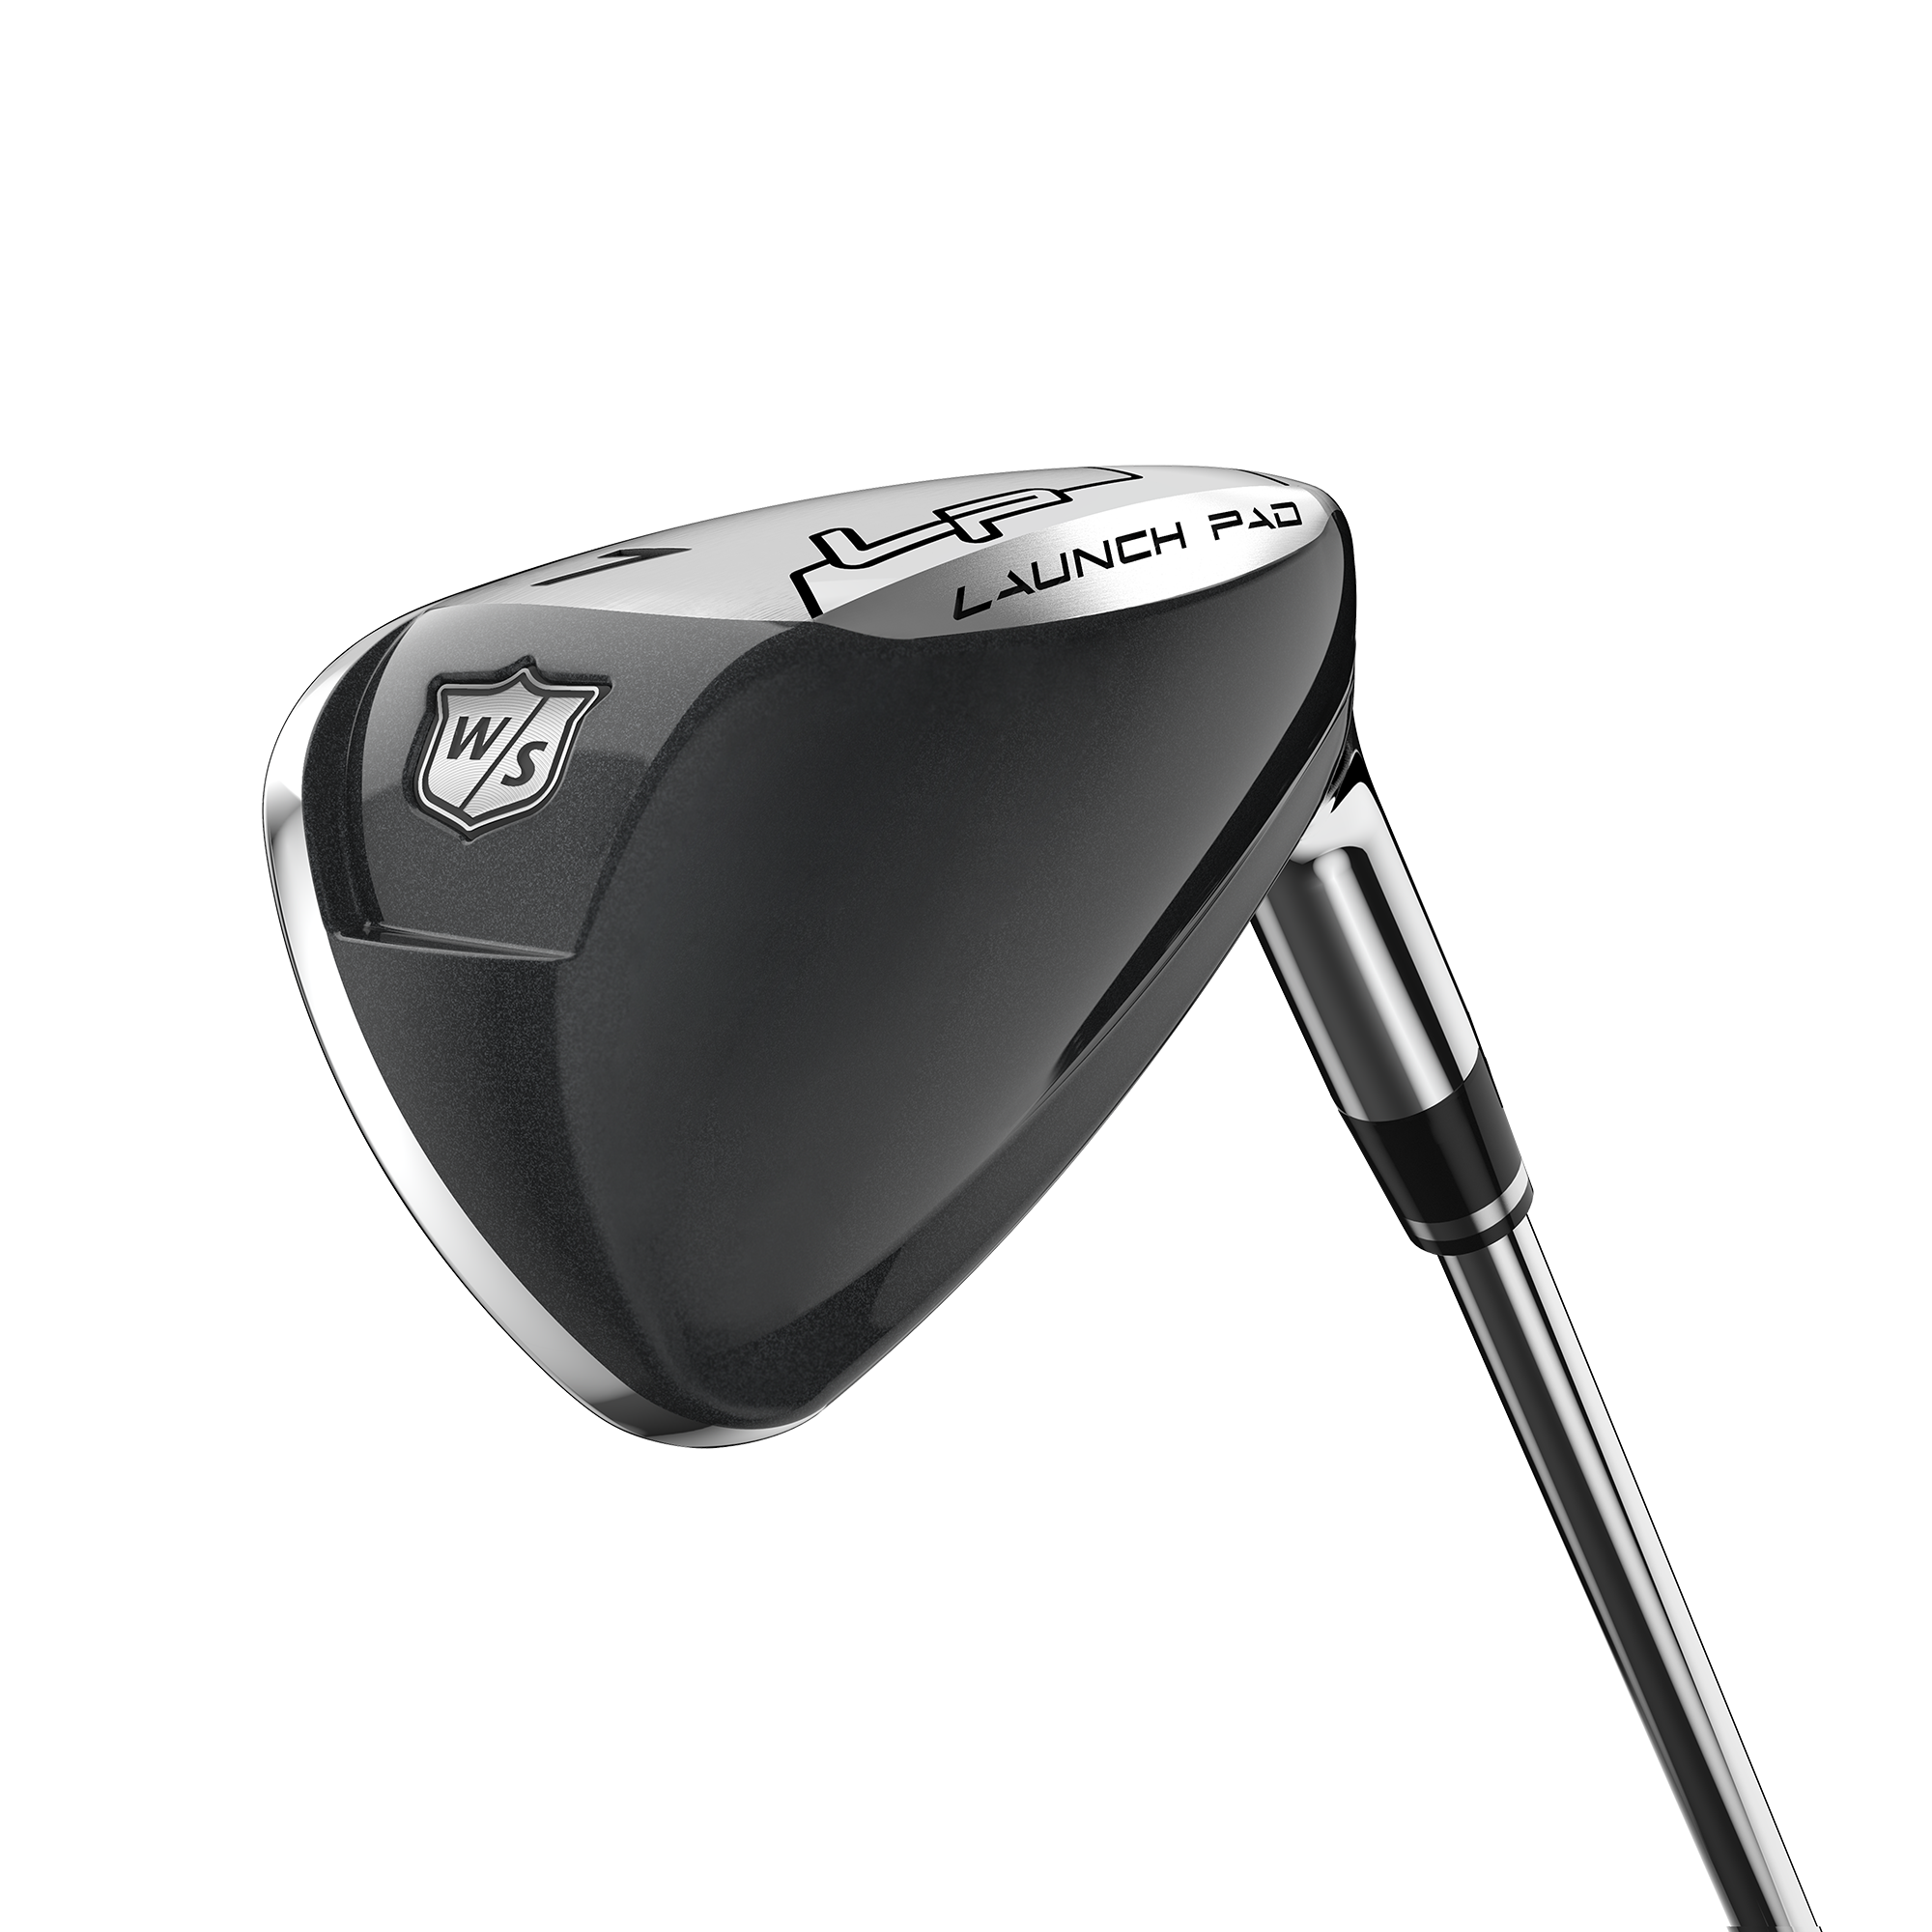 Wilson Launch Pad Irons elevate the ball and your game